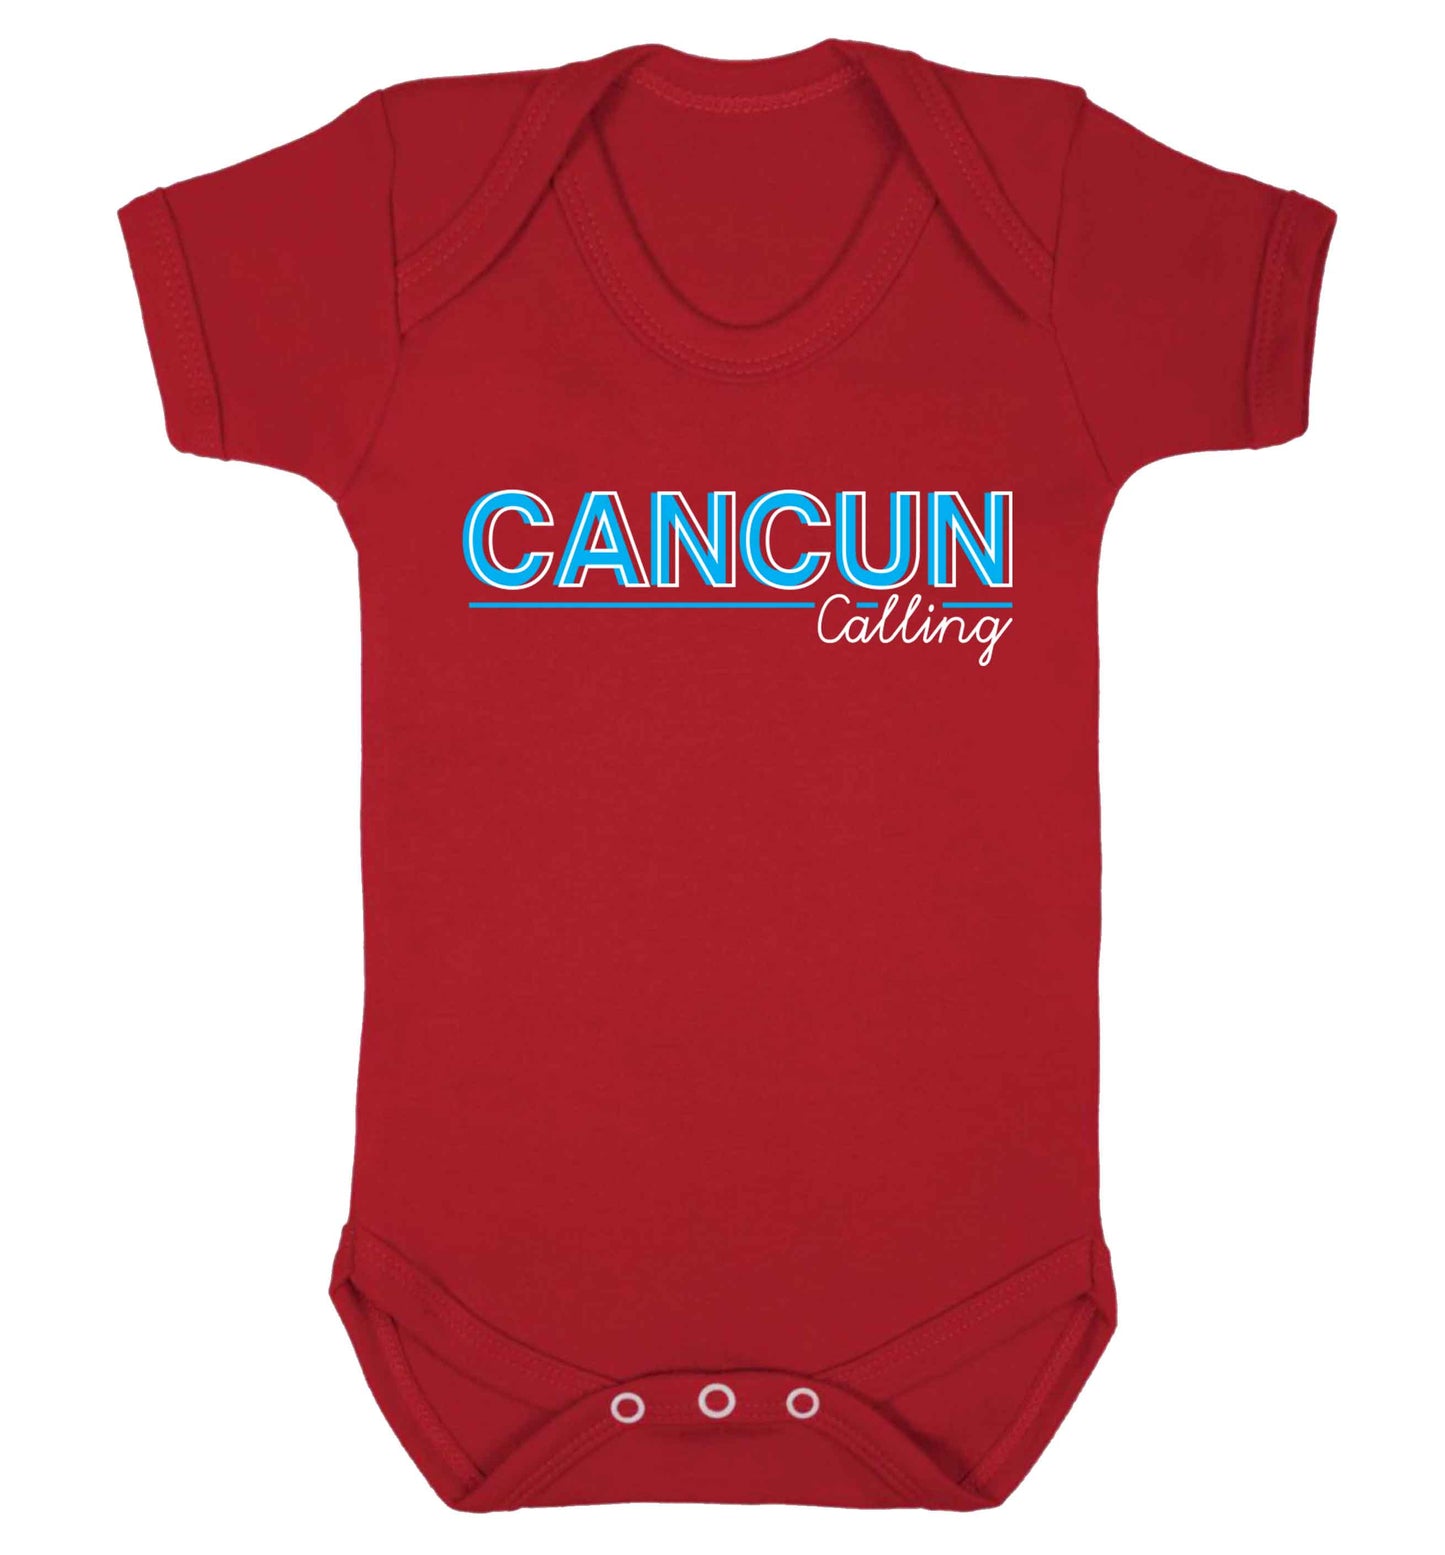 Cancun calling Baby Vest red 18-24 months